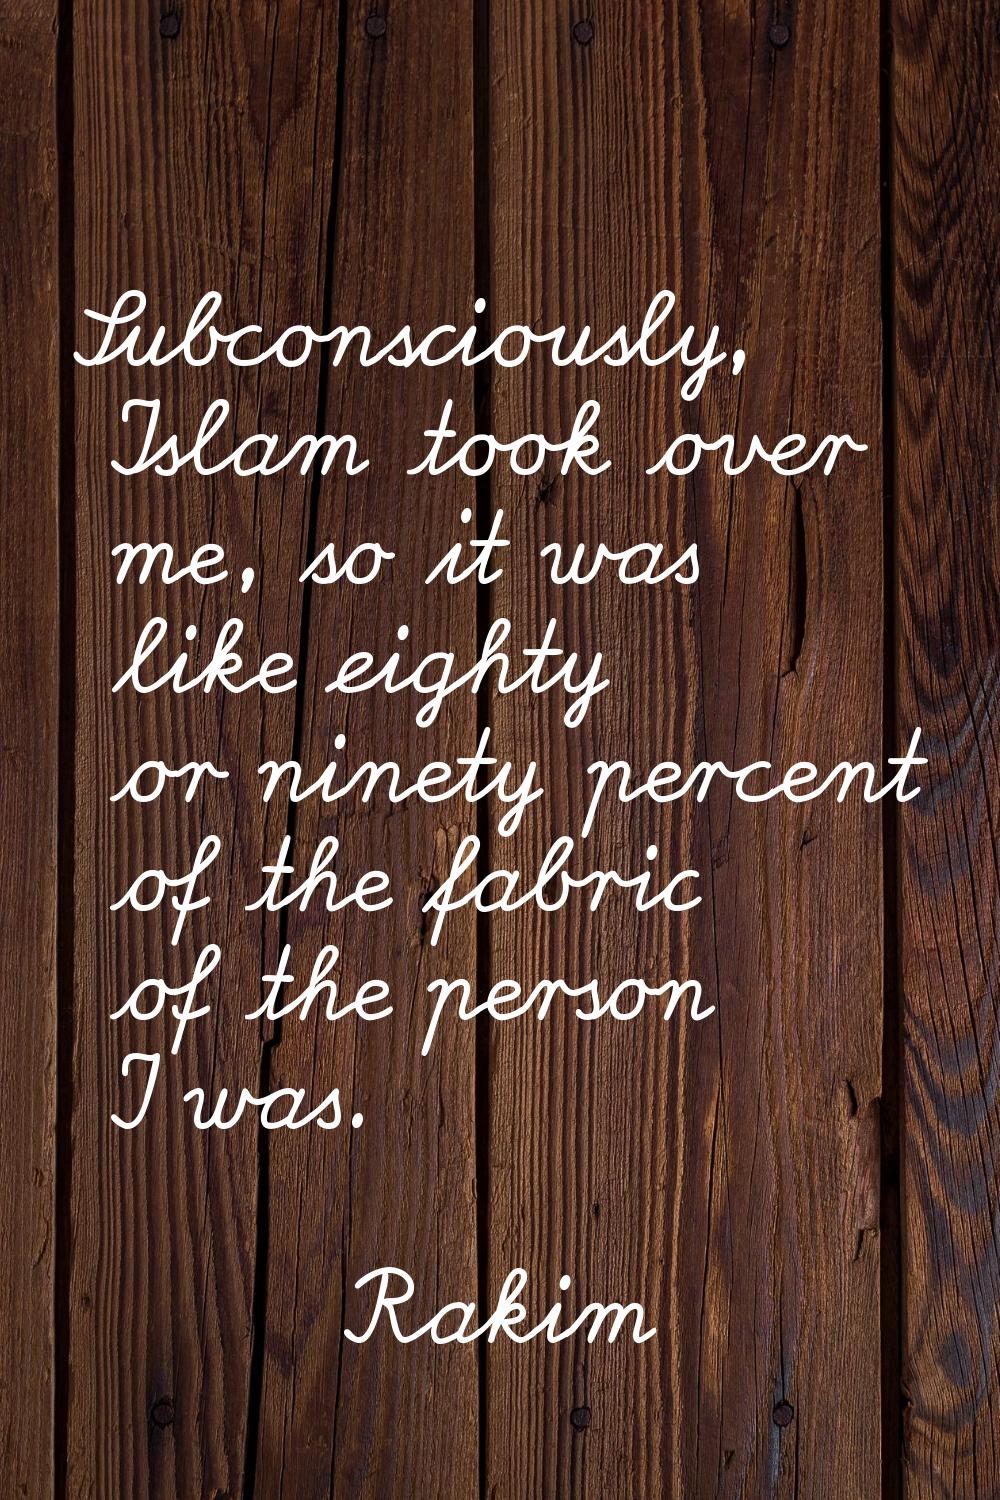 Subconsciously, Islam took over me, so it was like eighty or ninety percent of the fabric of the pe